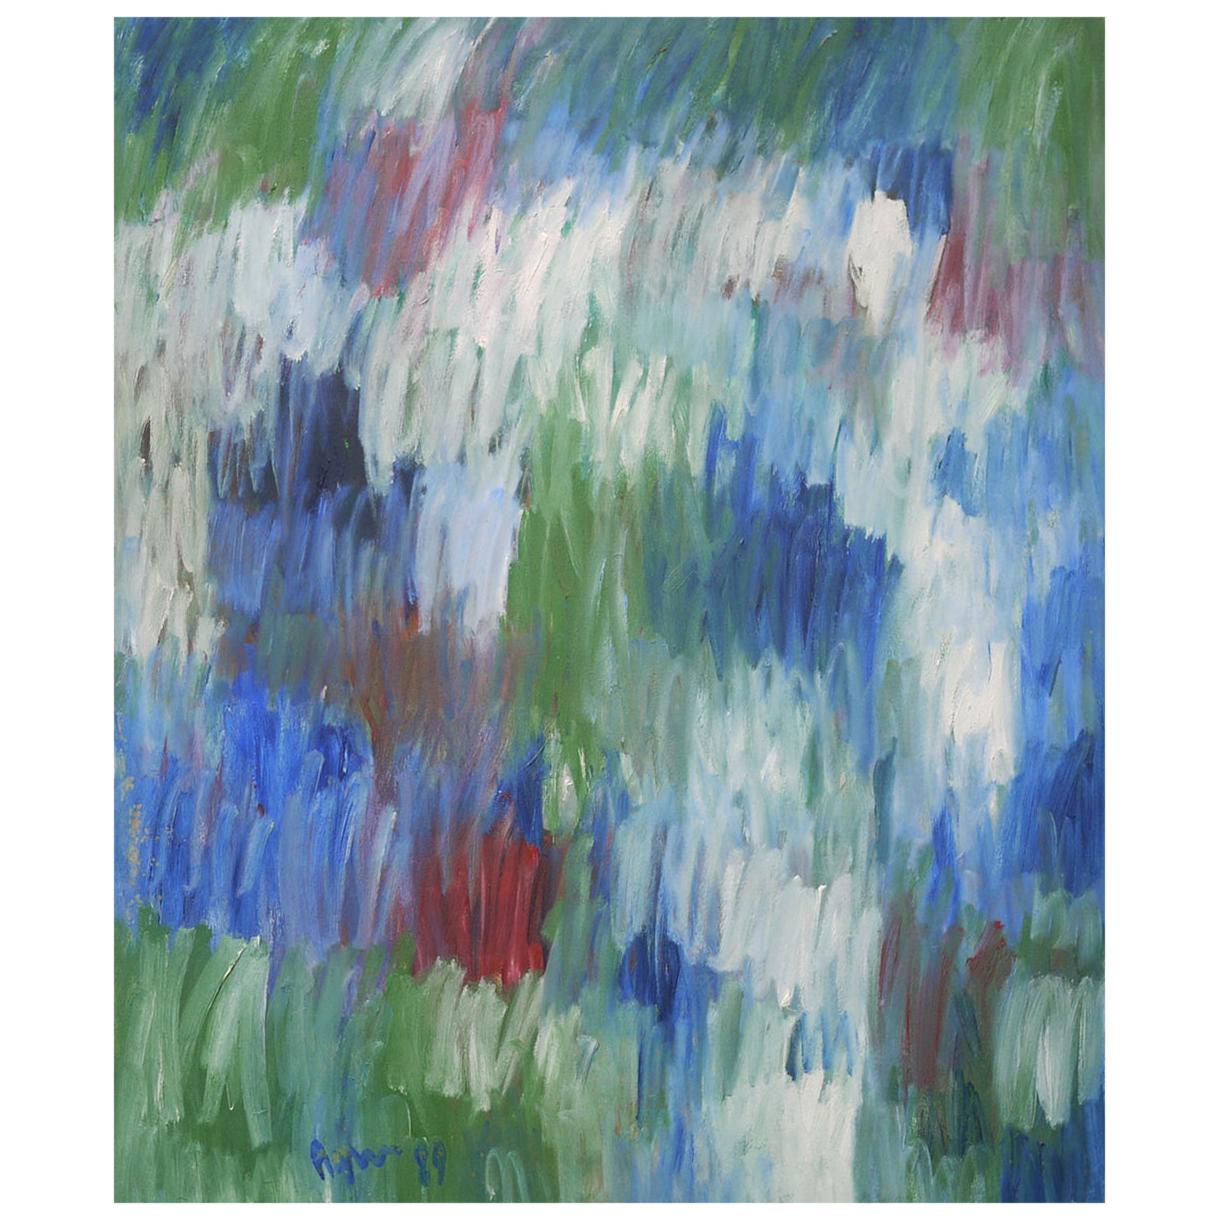 Abstract Painting, Agner, Hans Peter, Cascade of Colors, 1989